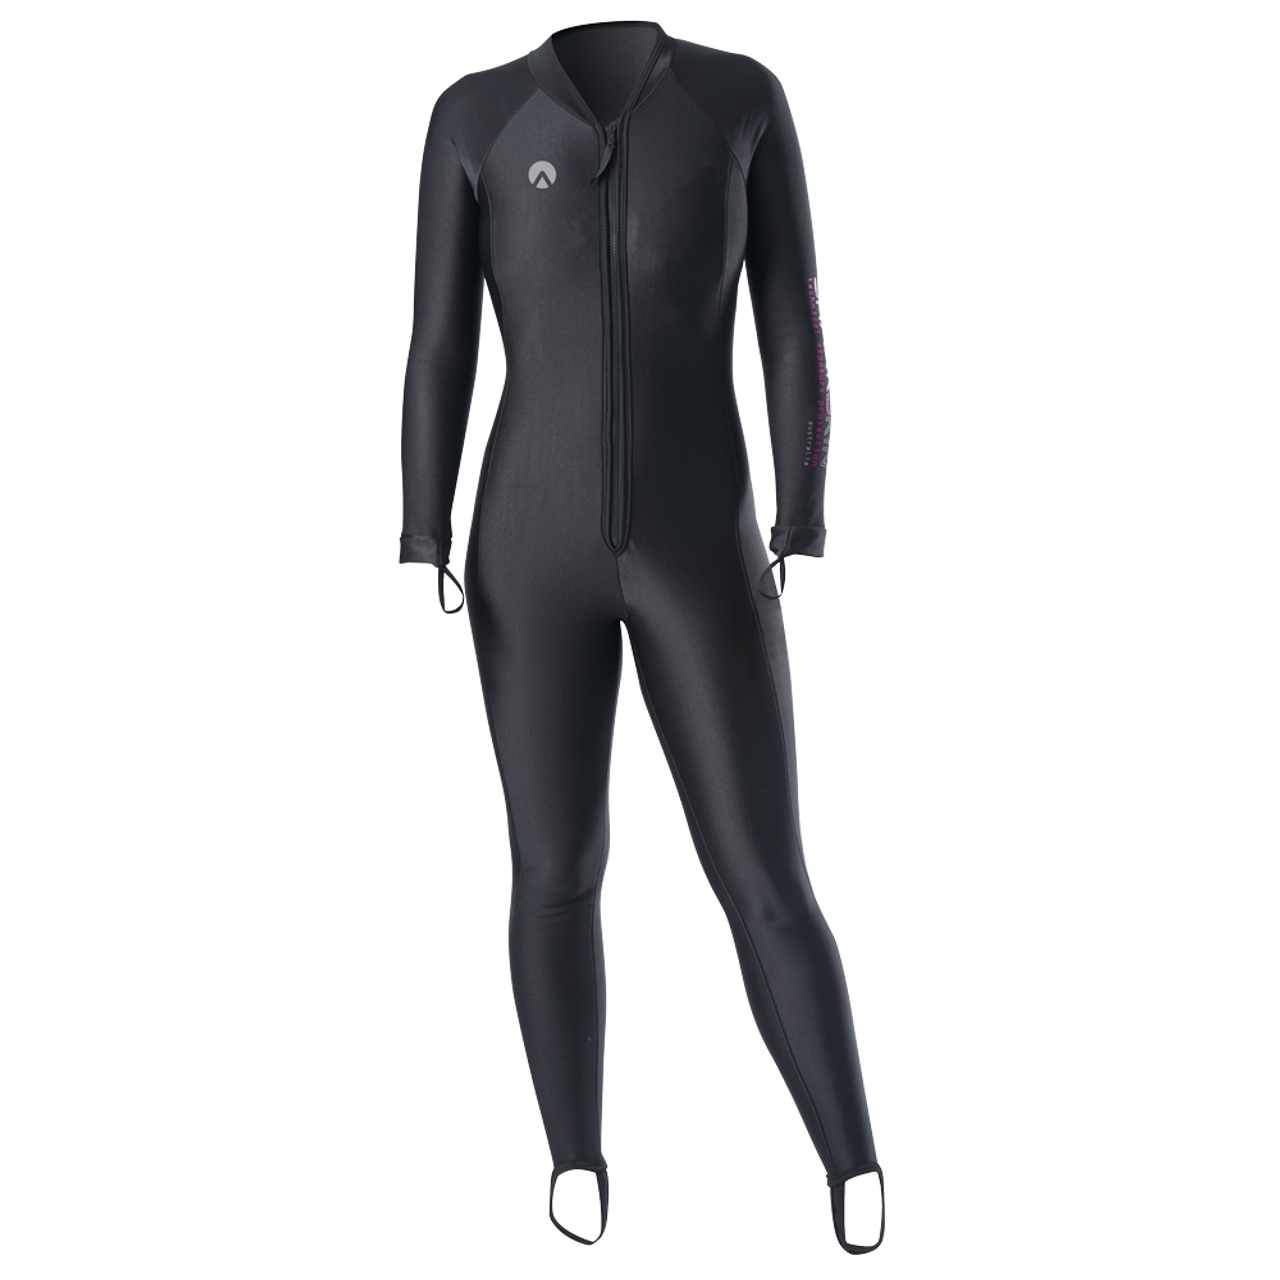 Girls Wetsuit Swimming Clothes With Zipper Front Zipper Swimming